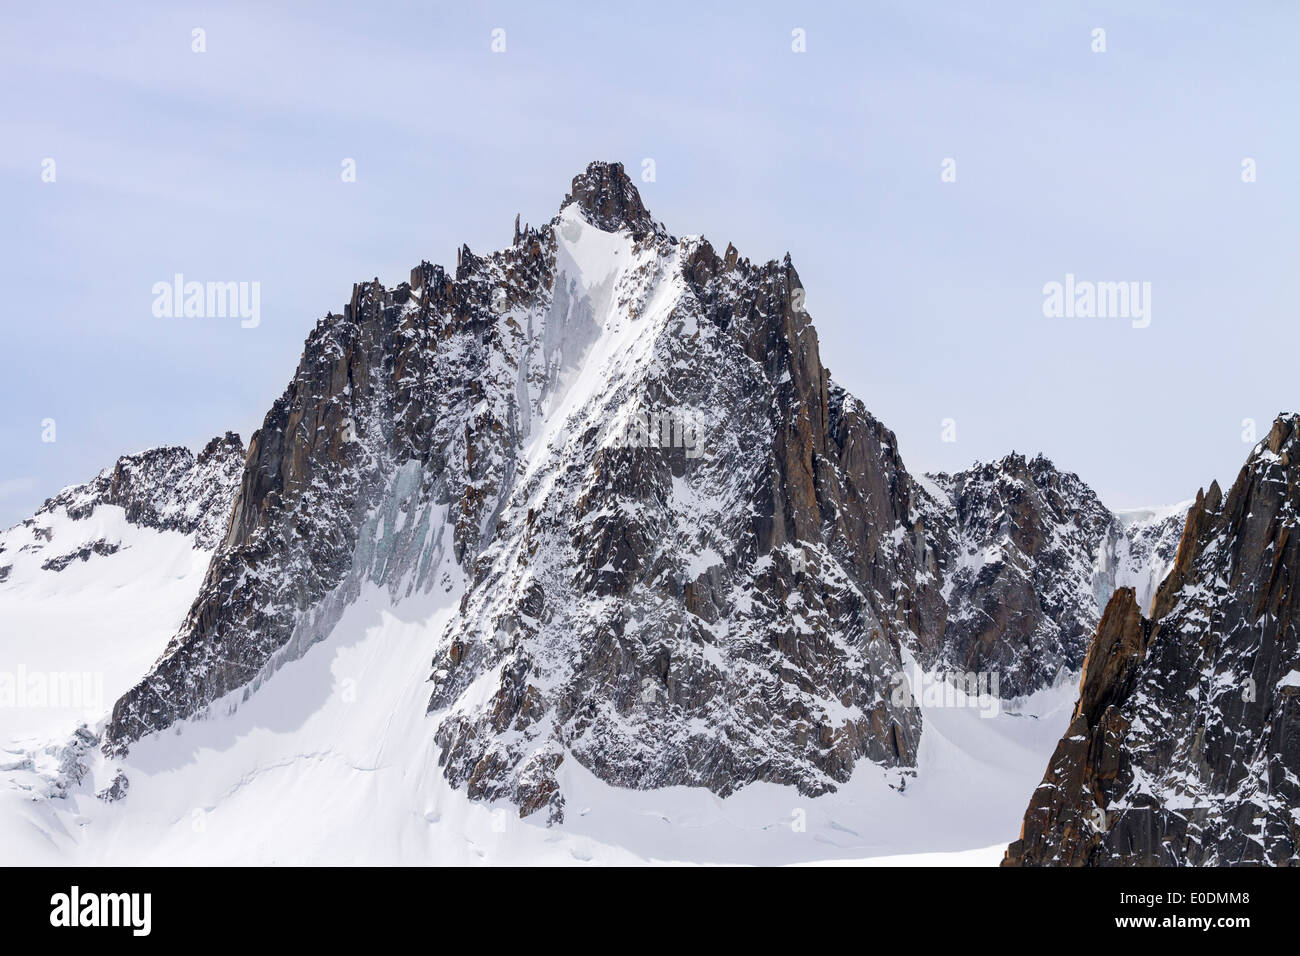 La Tour Ronde (3792m) as seen from the Glacier du Géante while skiing the Vallée Blanche run to Chamonix Mont Blanc, France Stock Photo